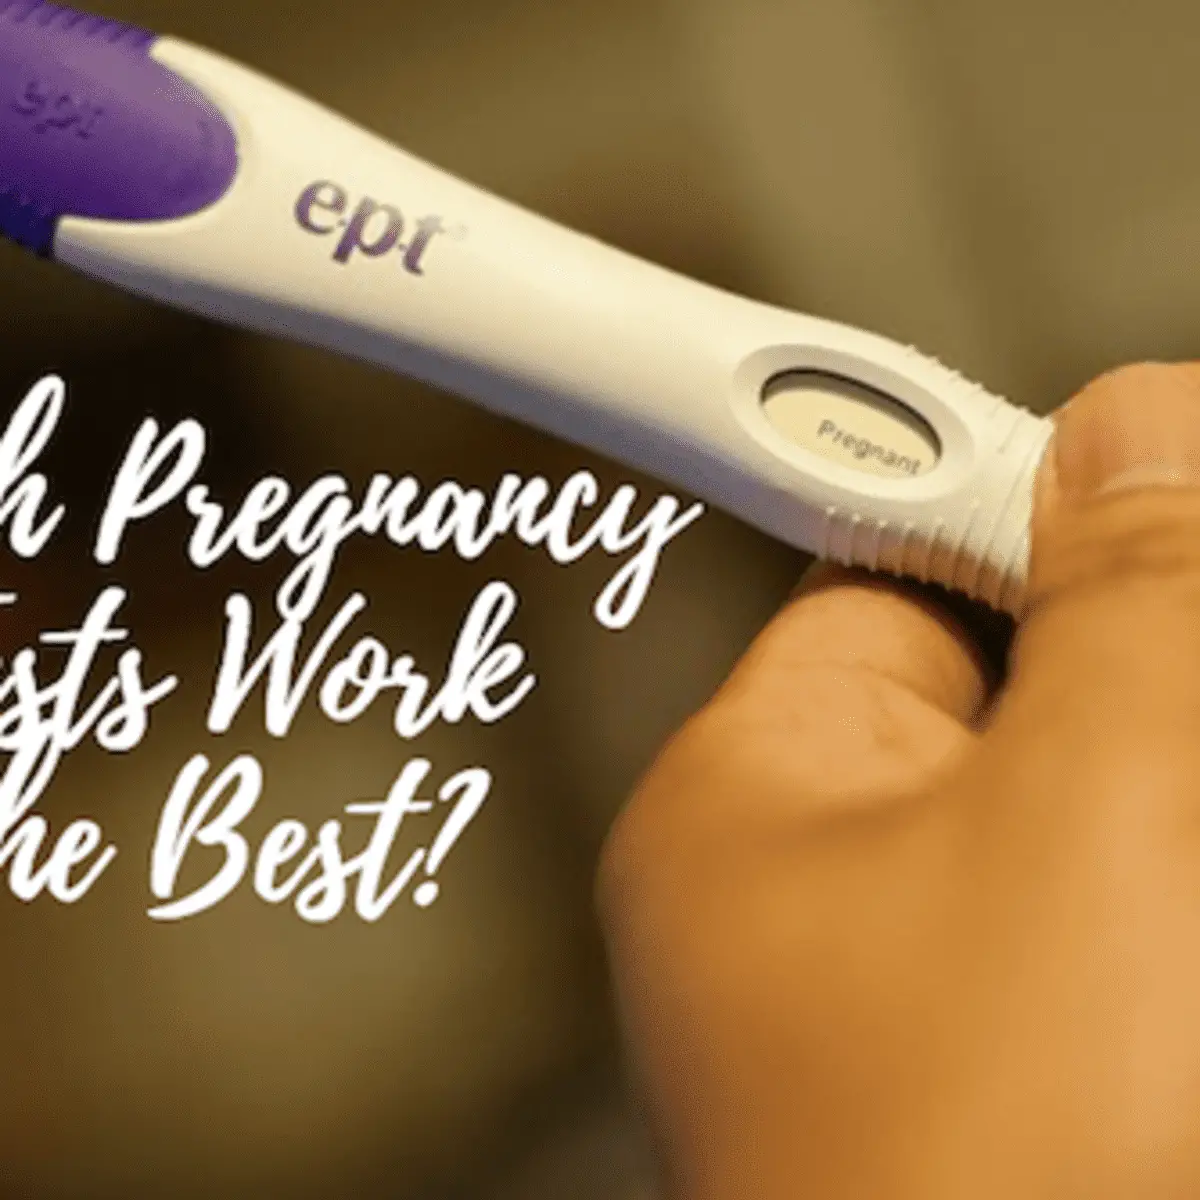 newclothingdesigns: Home Pregnancy Test Too Early